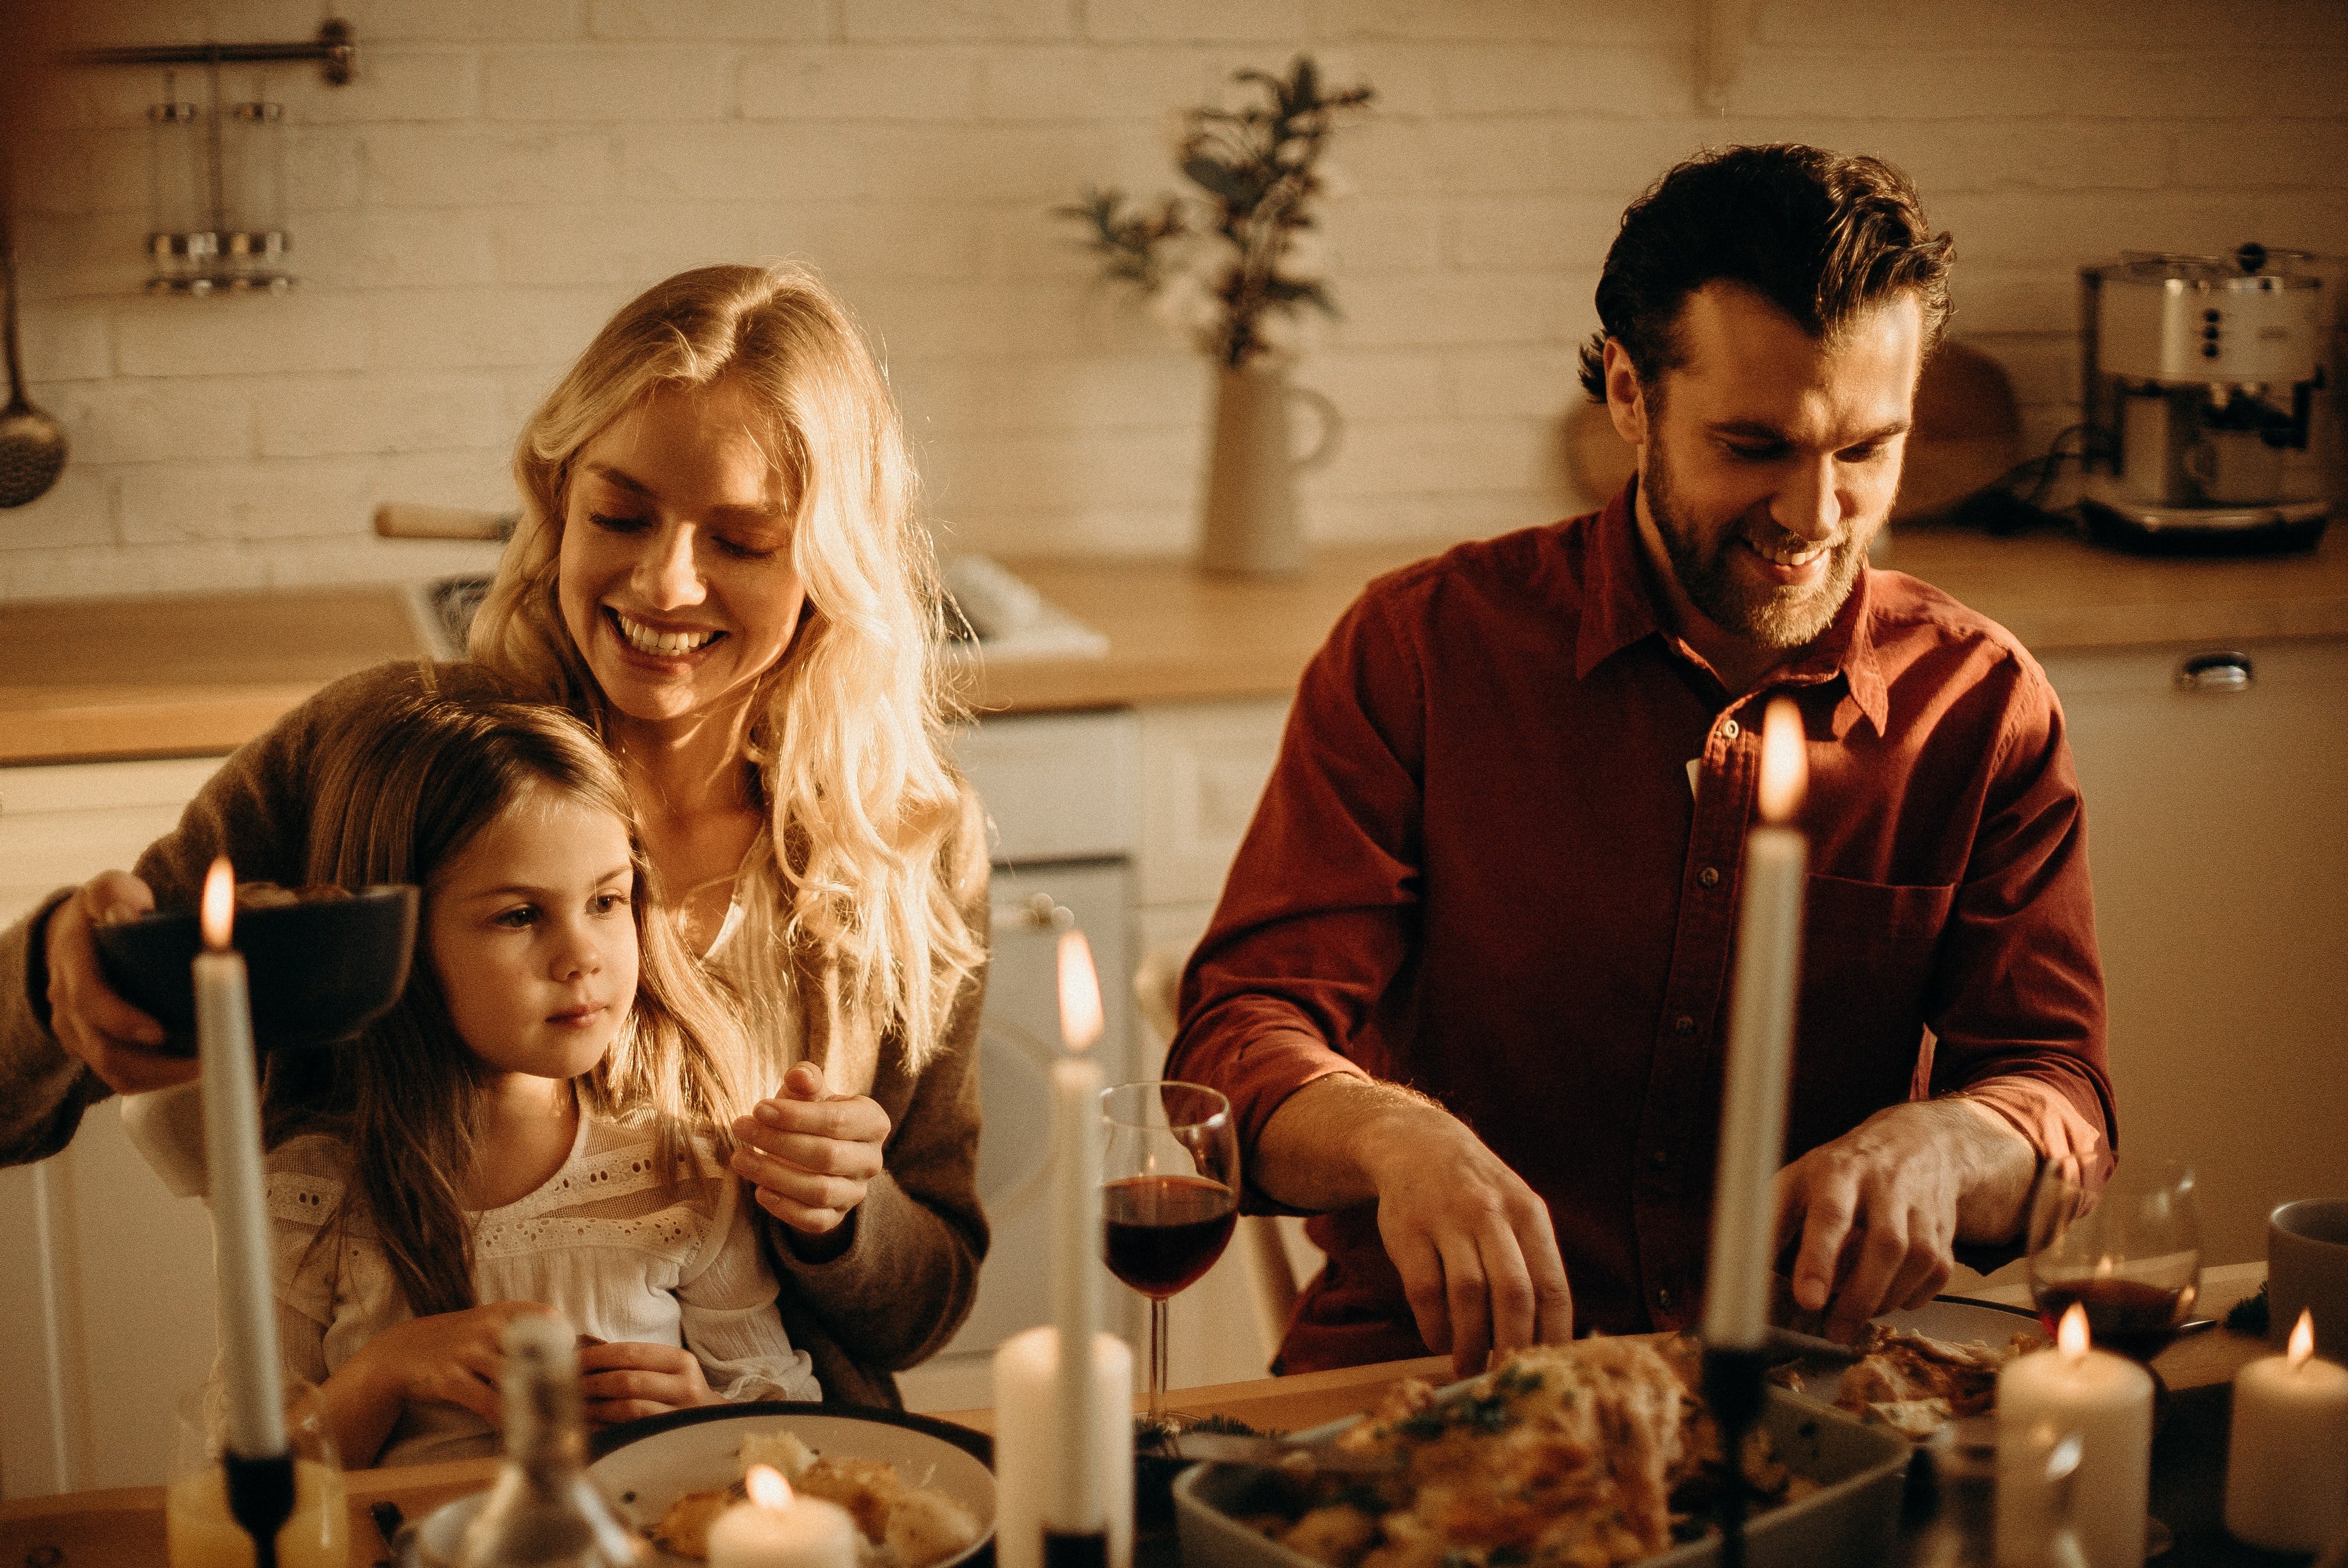 Patricia prepared dinner for her family and Patrick to enjoy. | Source: Pexels